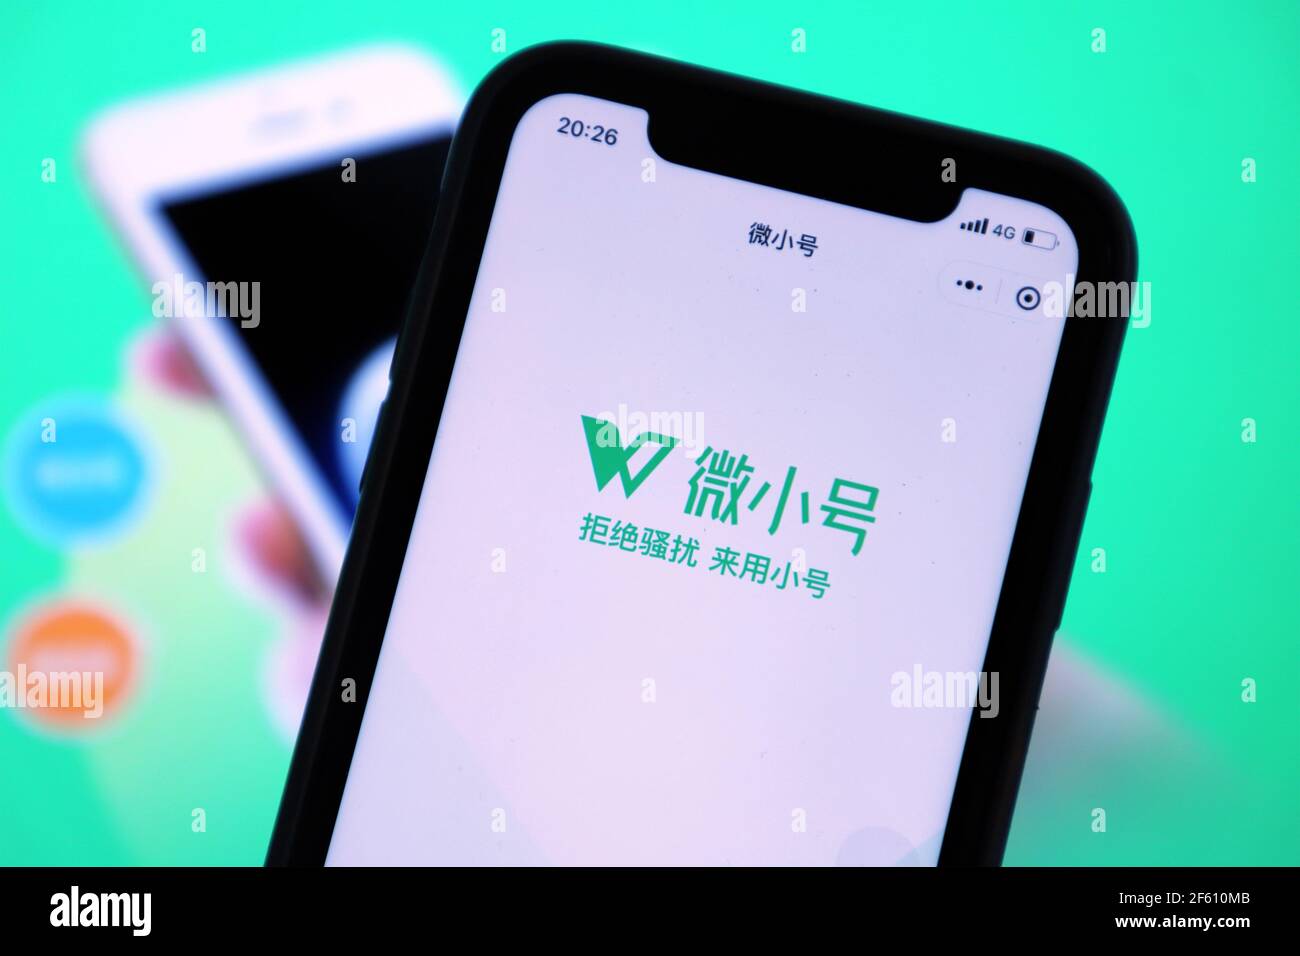 AKSU, CHINA - MARCH 29, 2021 - A mobile phone shows Tencent's "micro number"  interface in Aksu, Xinjiang province, China, March 29, 2021. According to  the official introduction, micro number is a